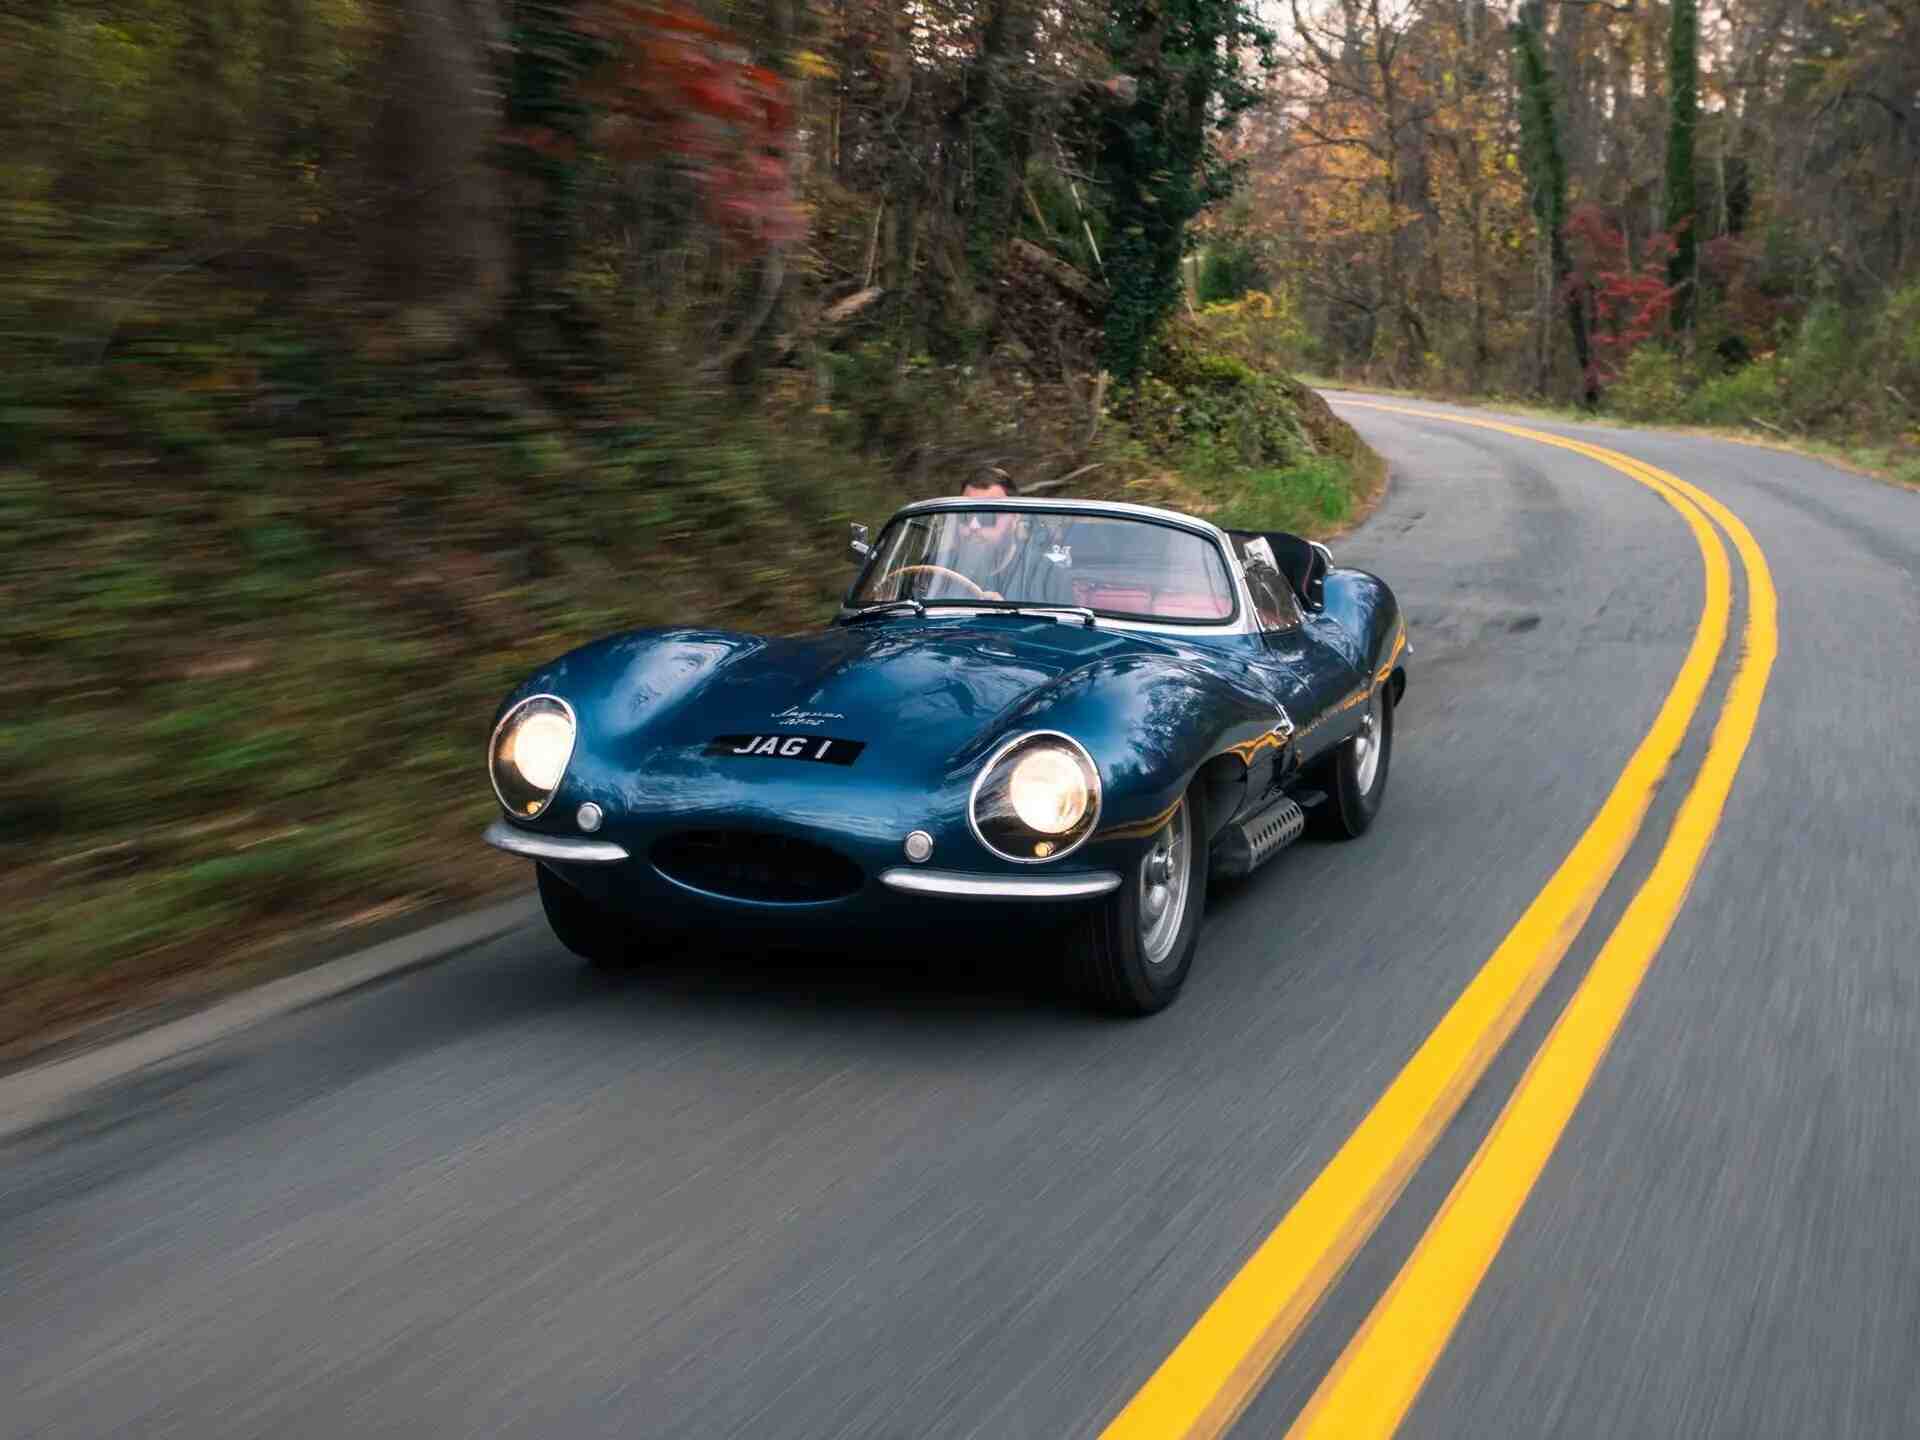 Converting Surplus Le Mans D-Types Into the Iconic XKSS